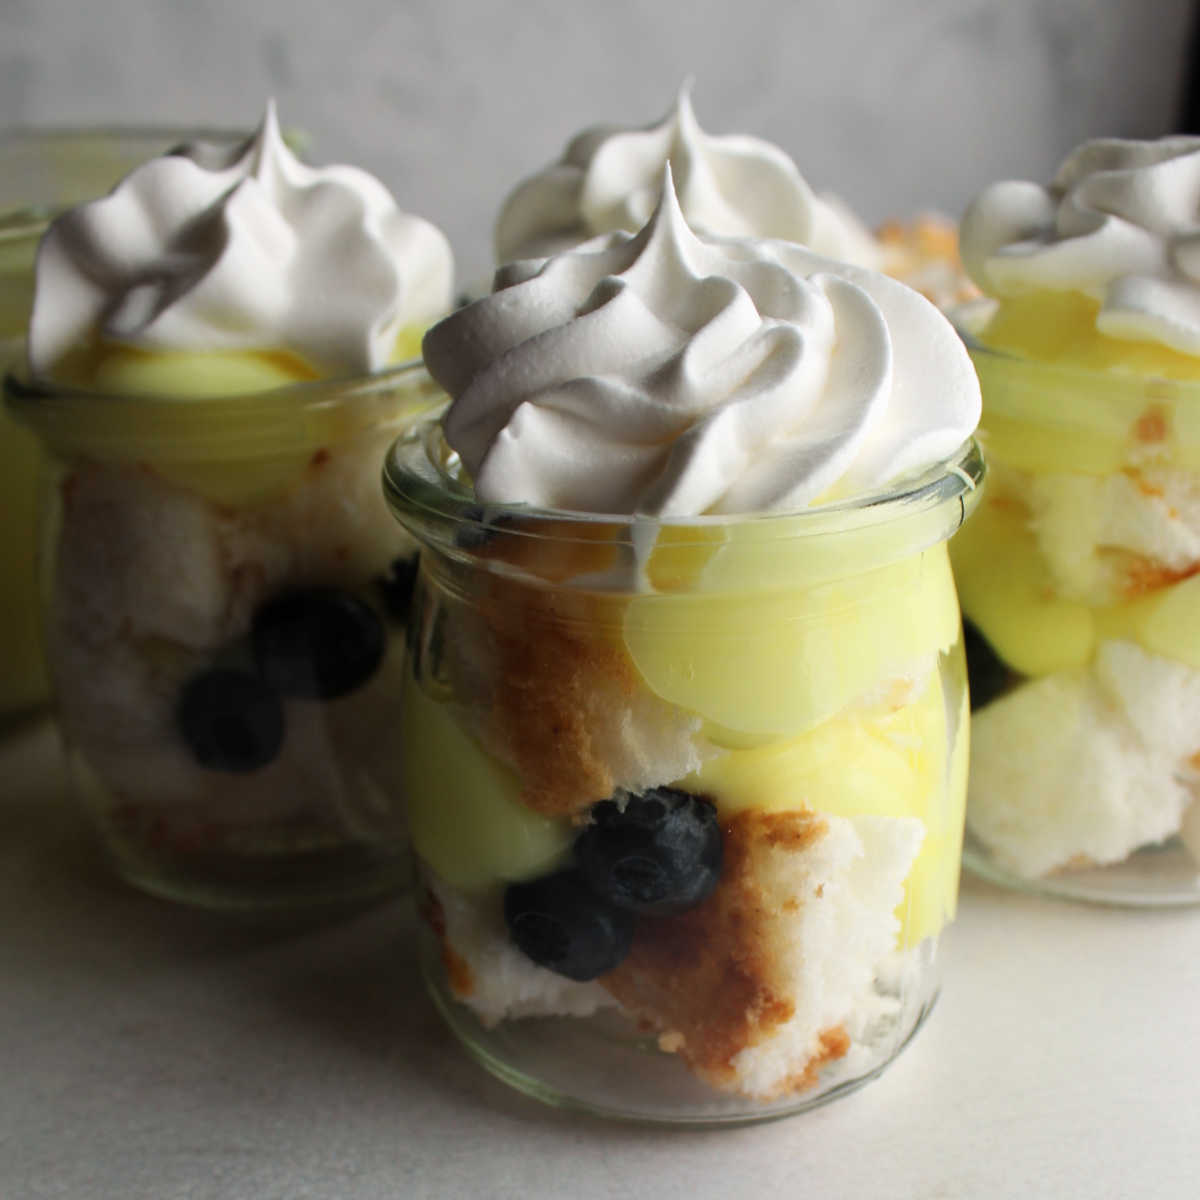 Small glass jars filled with layers of angel food cake, blueberries, lemon yogurt mixture and topped with whipped cream.